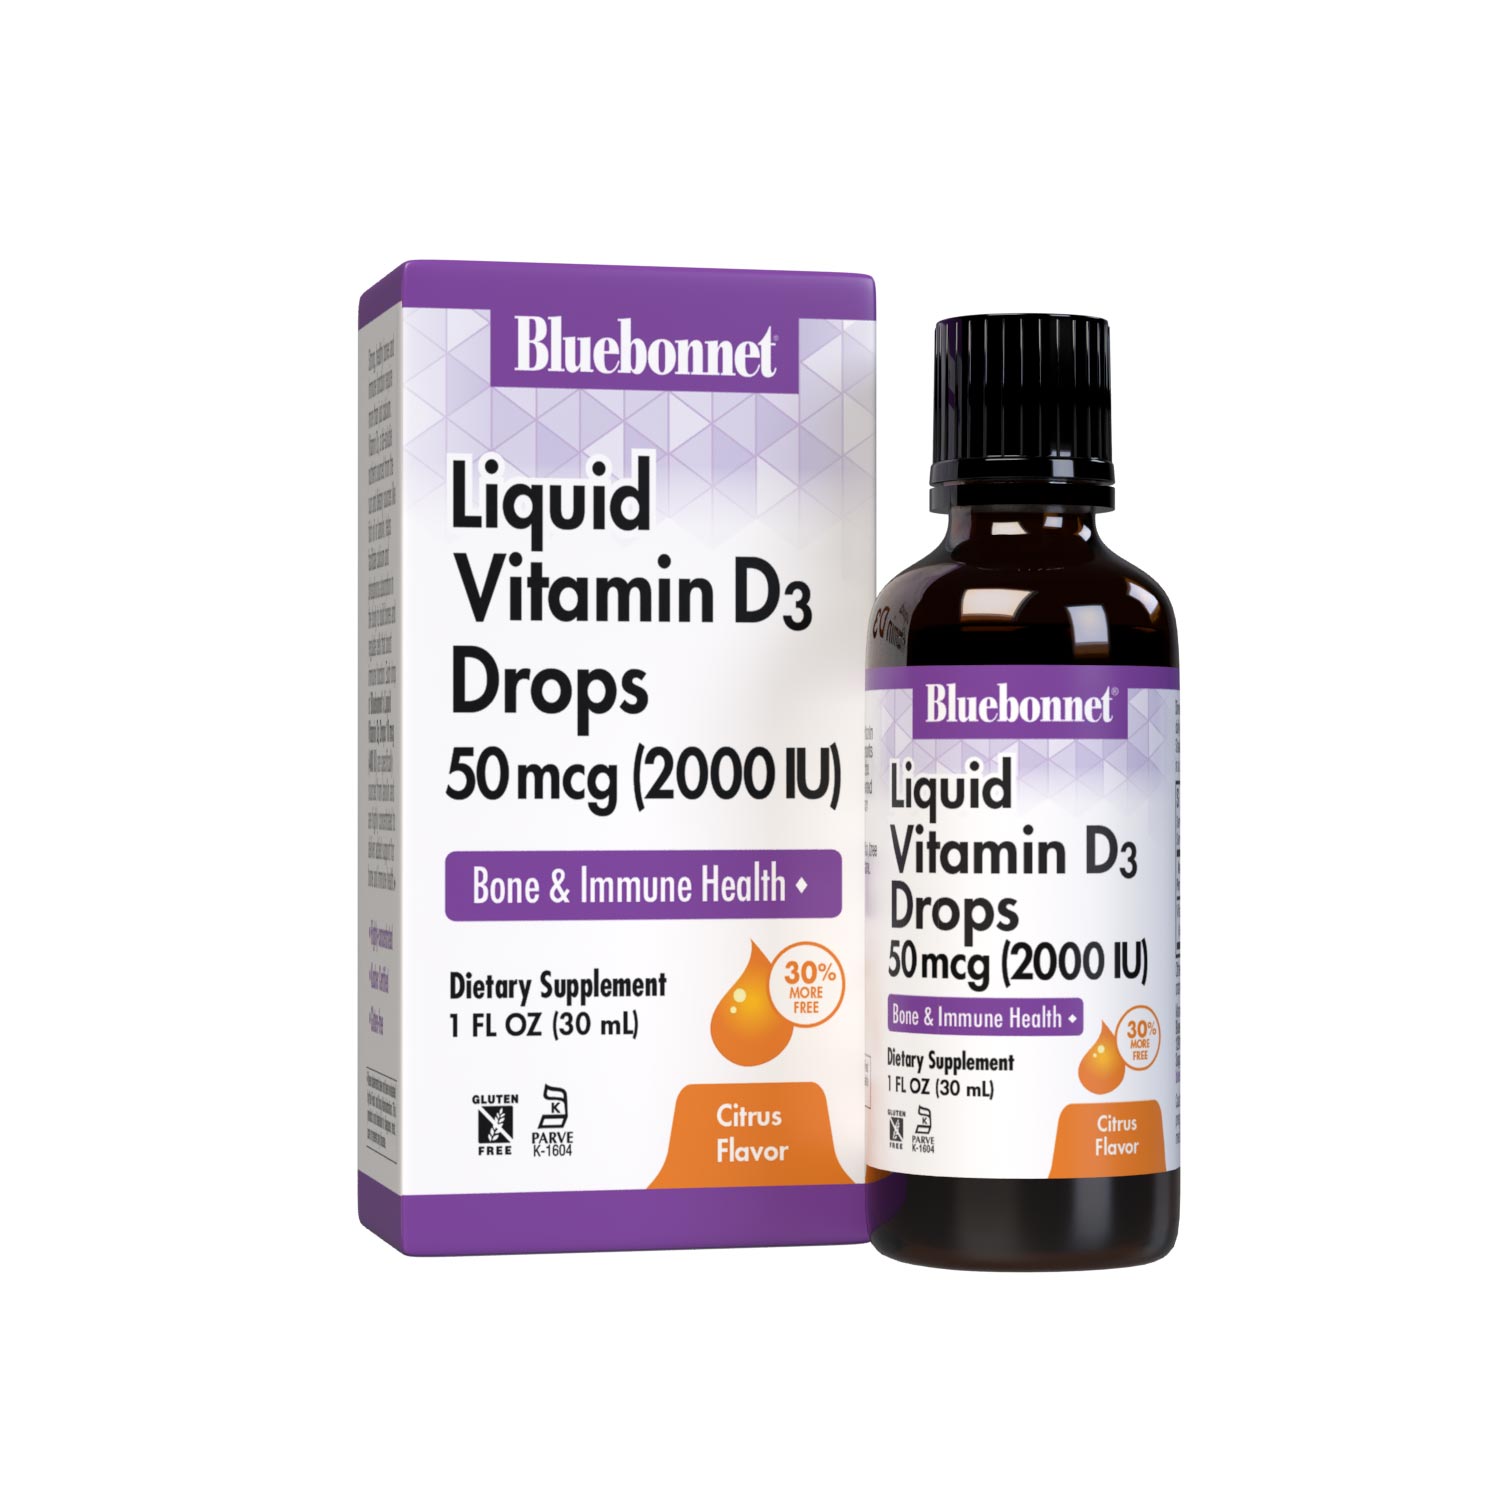 Bluebonnet’s Liquid Vitamin D3 Drops 2000 IU (50 mcg) are formulated with vitamin D3 (cholecalciferol) from lanolin for strong healthy bones. Each drop of this sunshine vitamin is flavored using a hint of orange and lemon essential oils. bottle with box #size_1 fl oz